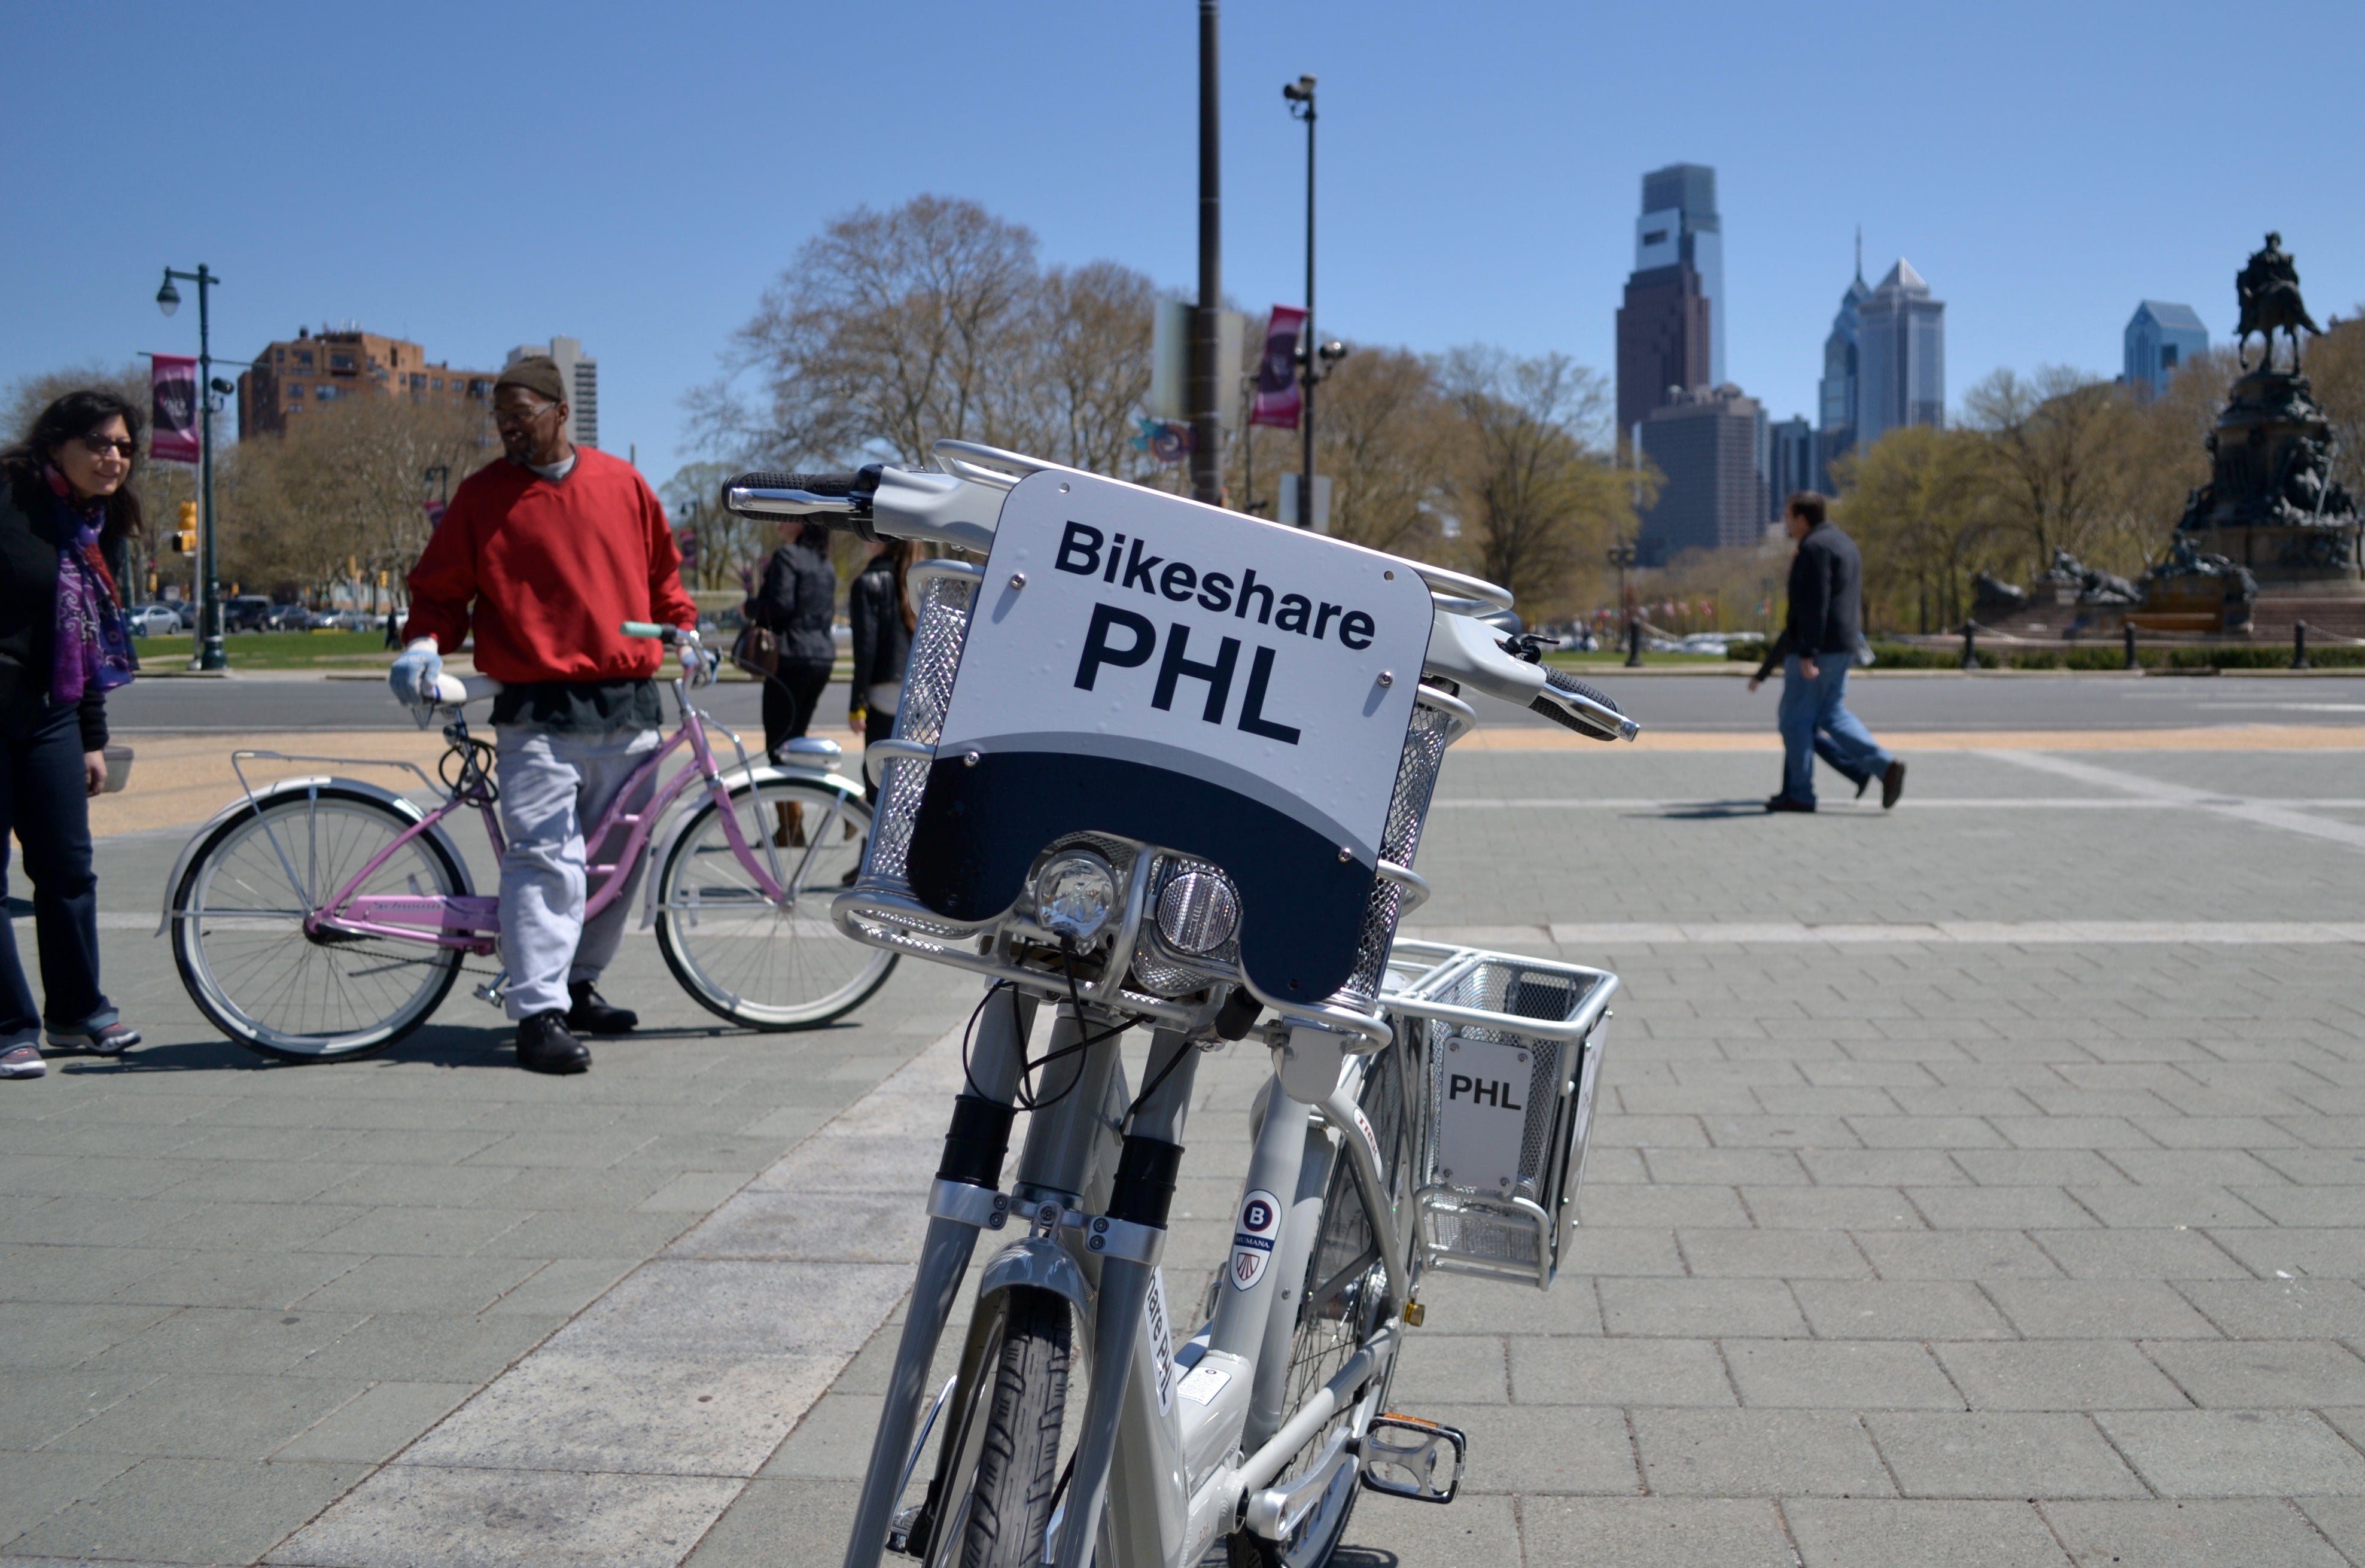 Philly's bike share system is set to roll out in spring 2015